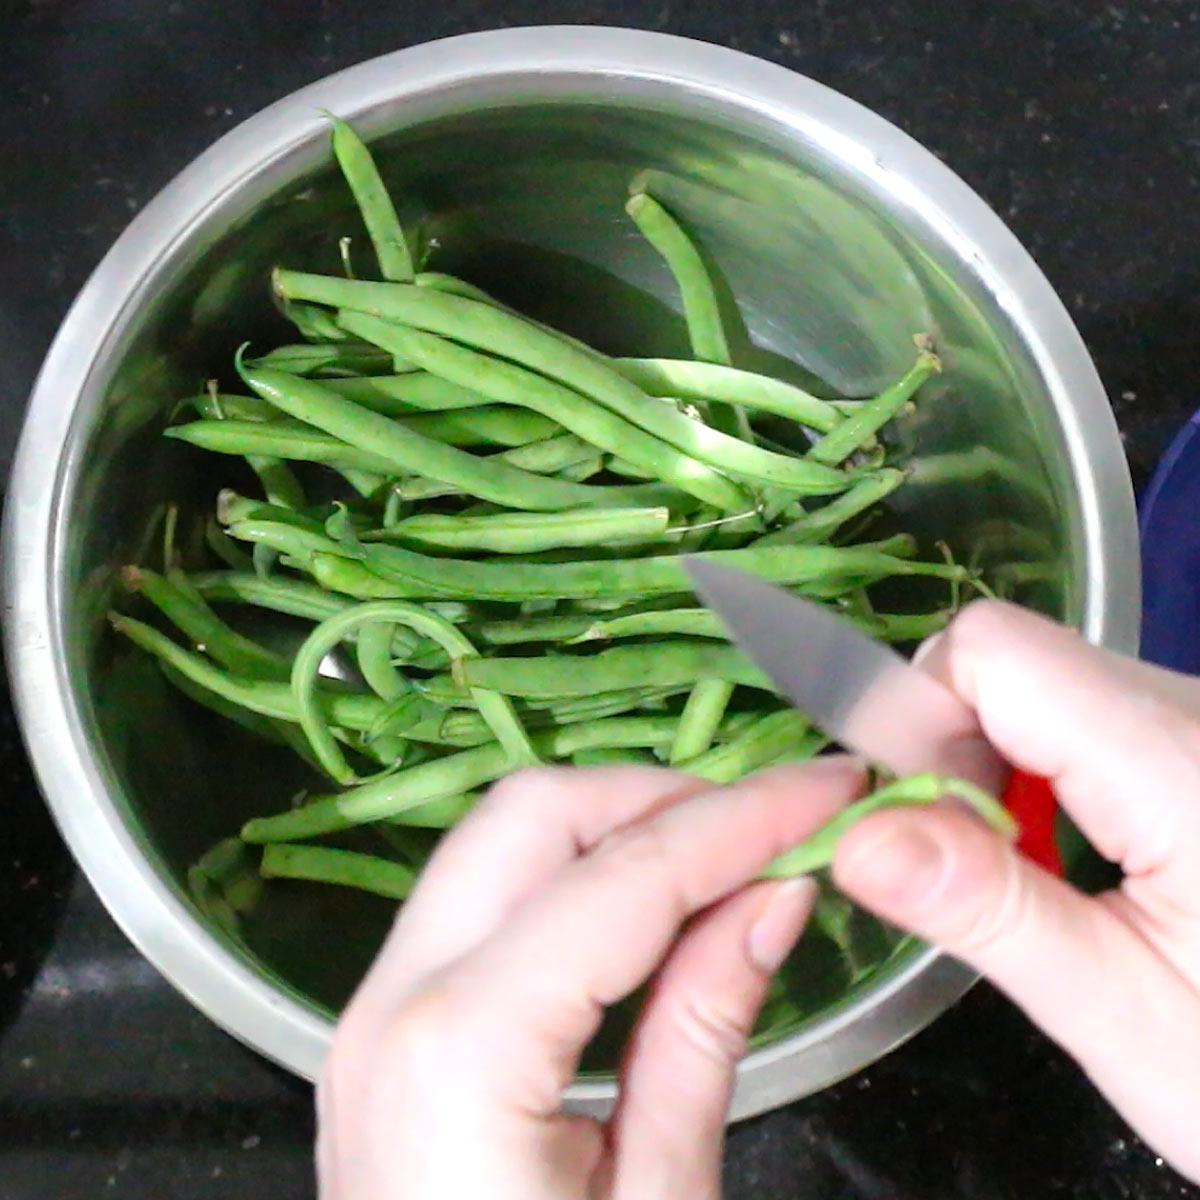 trimming green bean ends